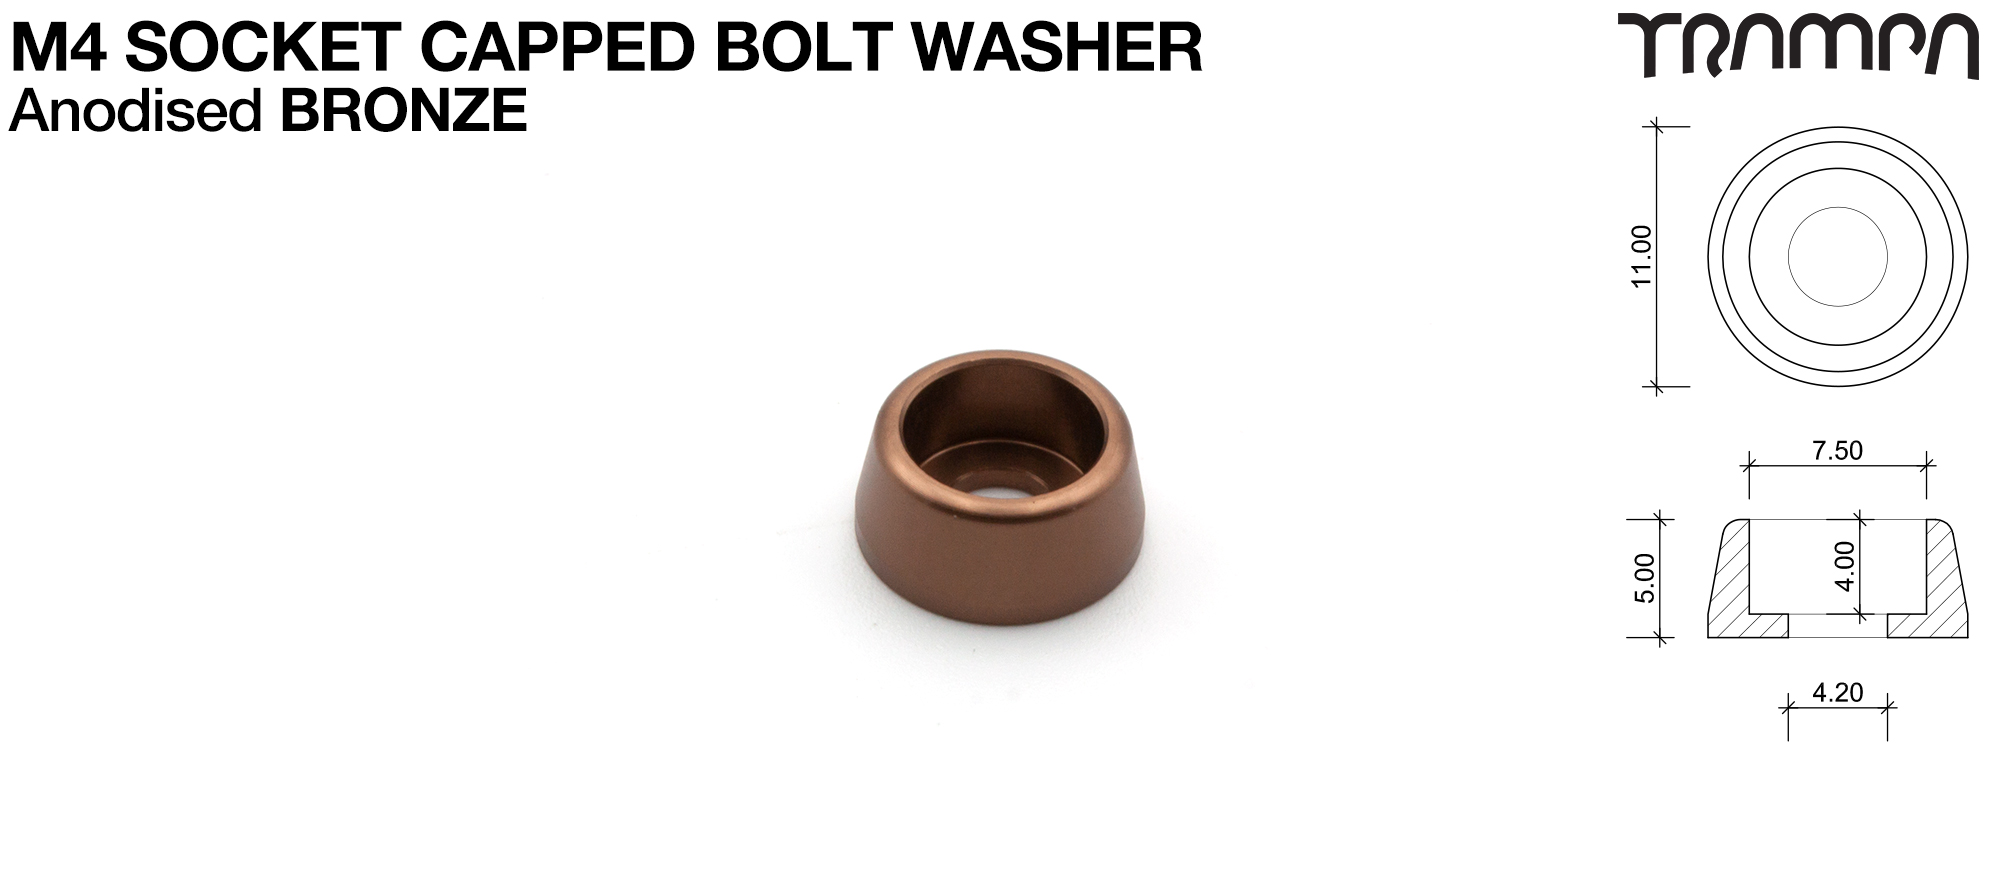 M4 Socket Capped Washer - Anodised BRONZE